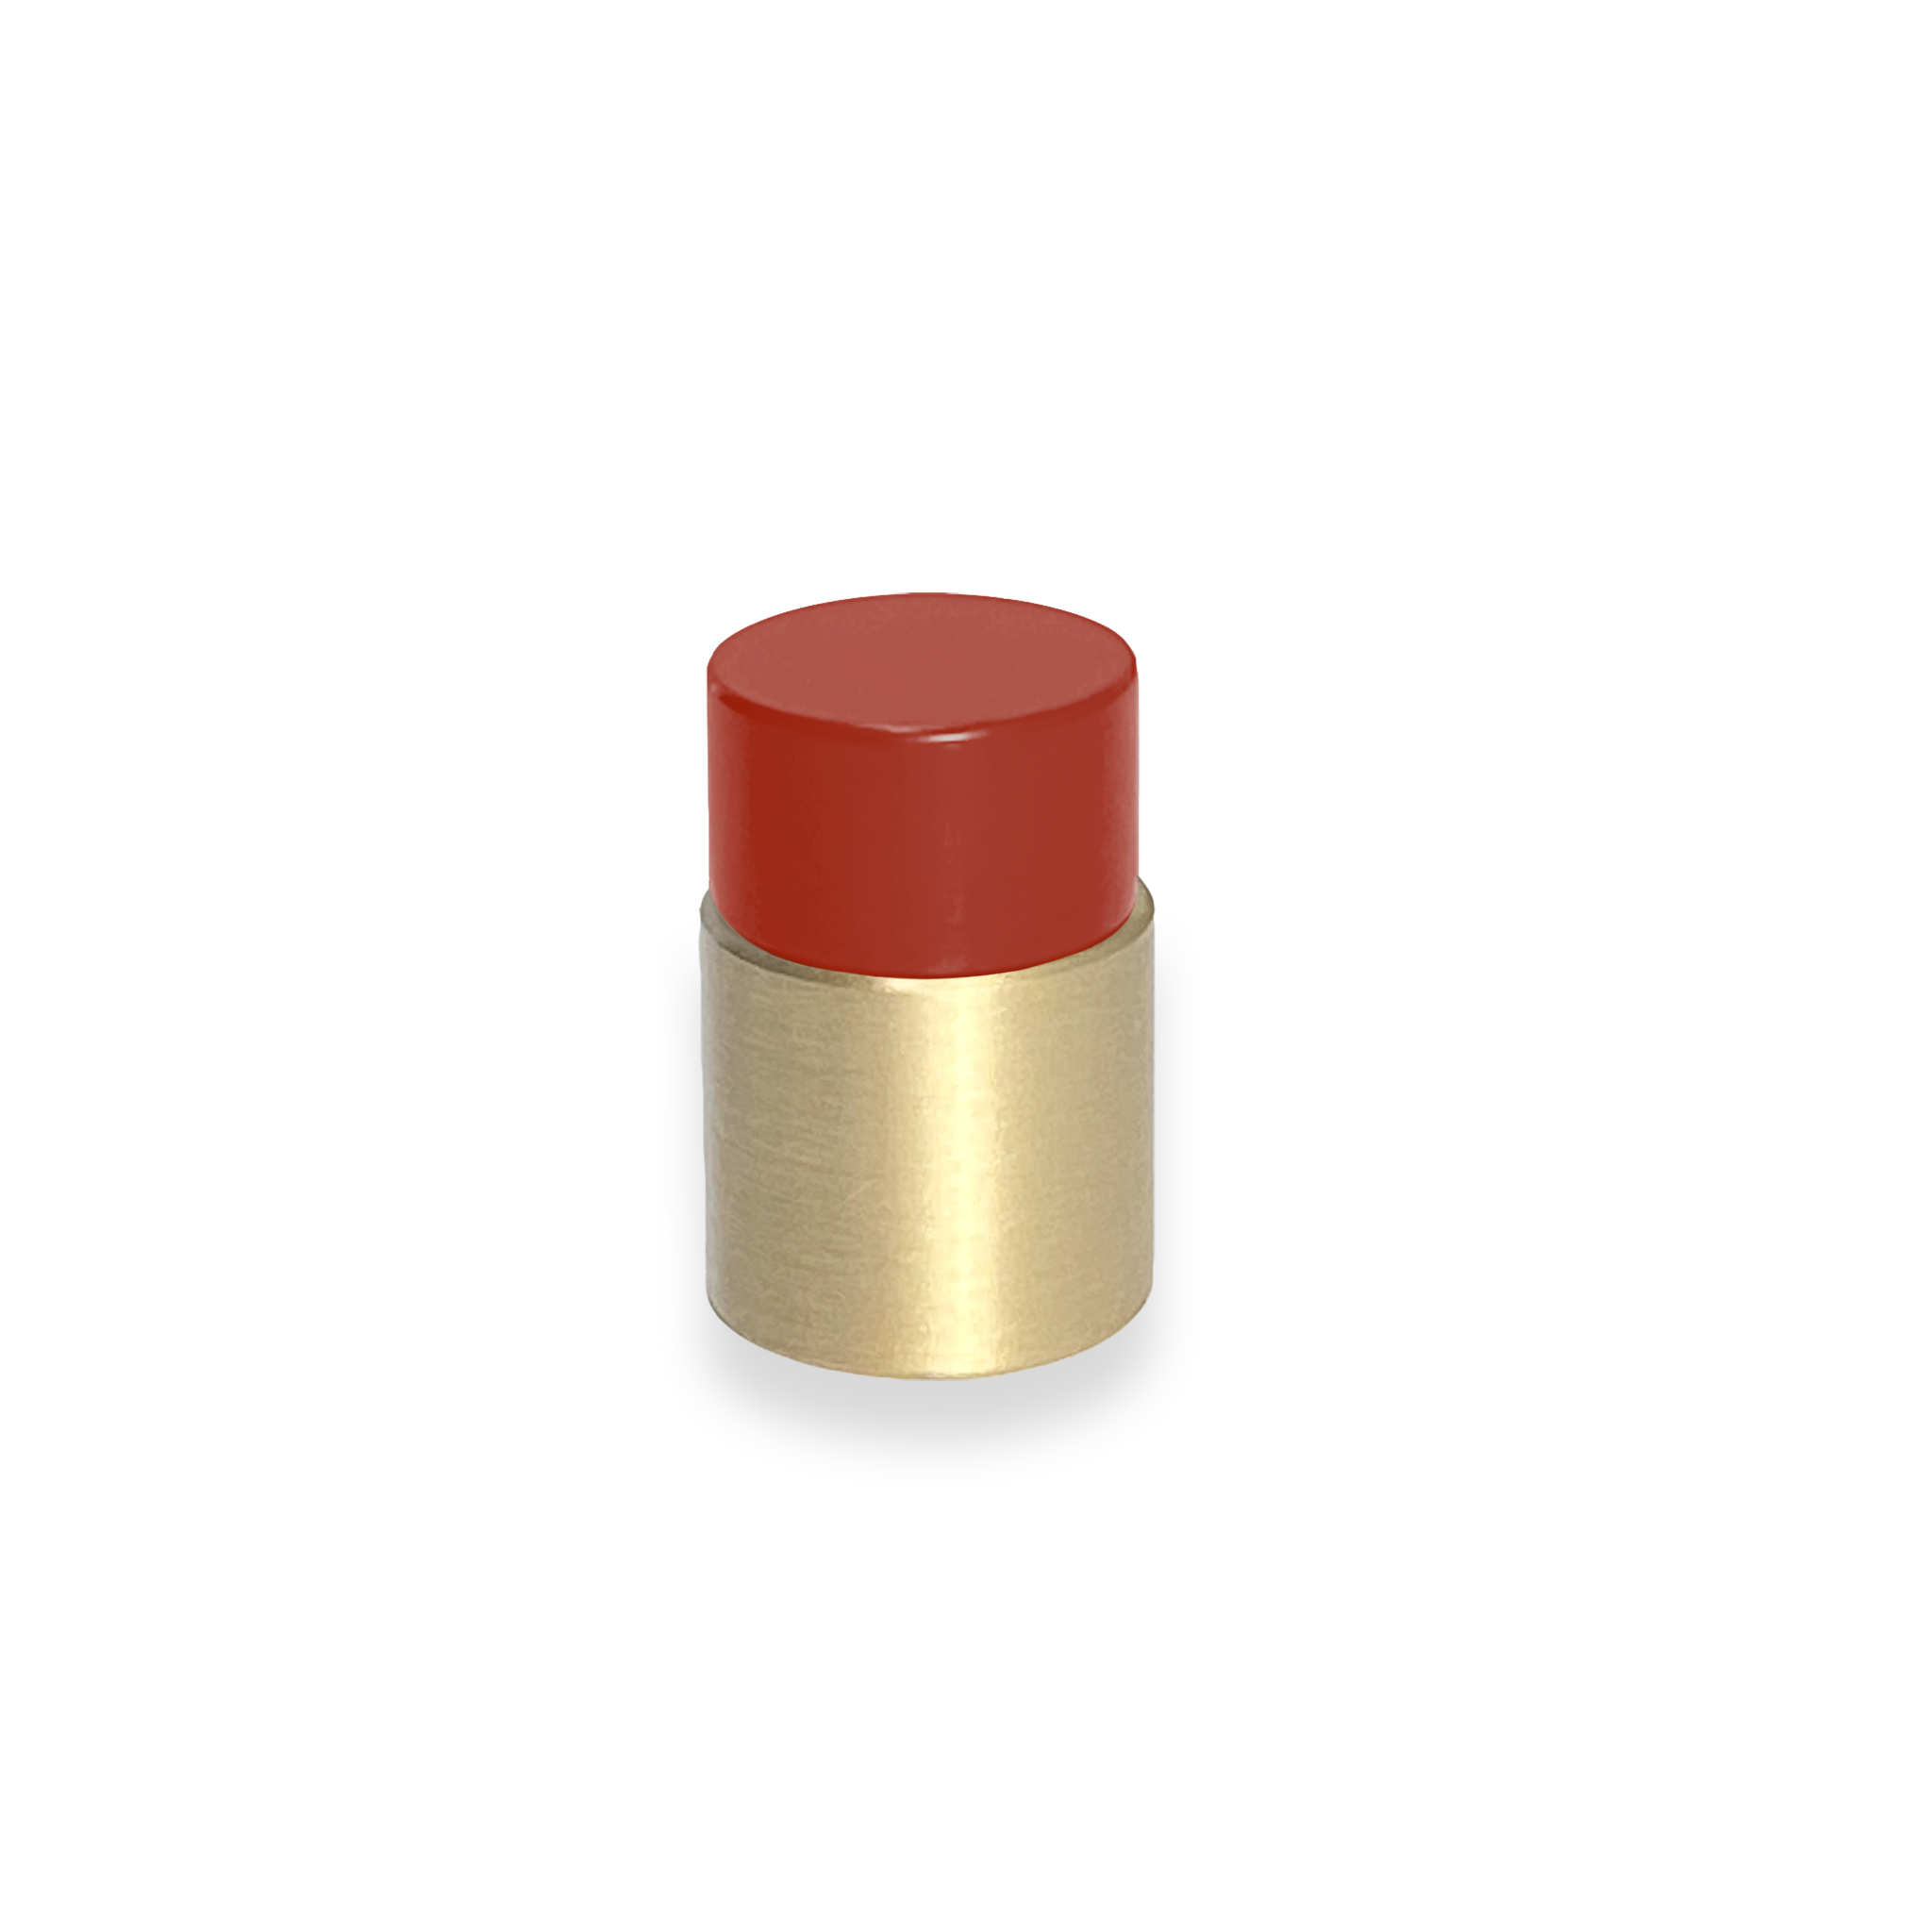 Brass and riding hood red color Nip knob Dutton Brown hardware